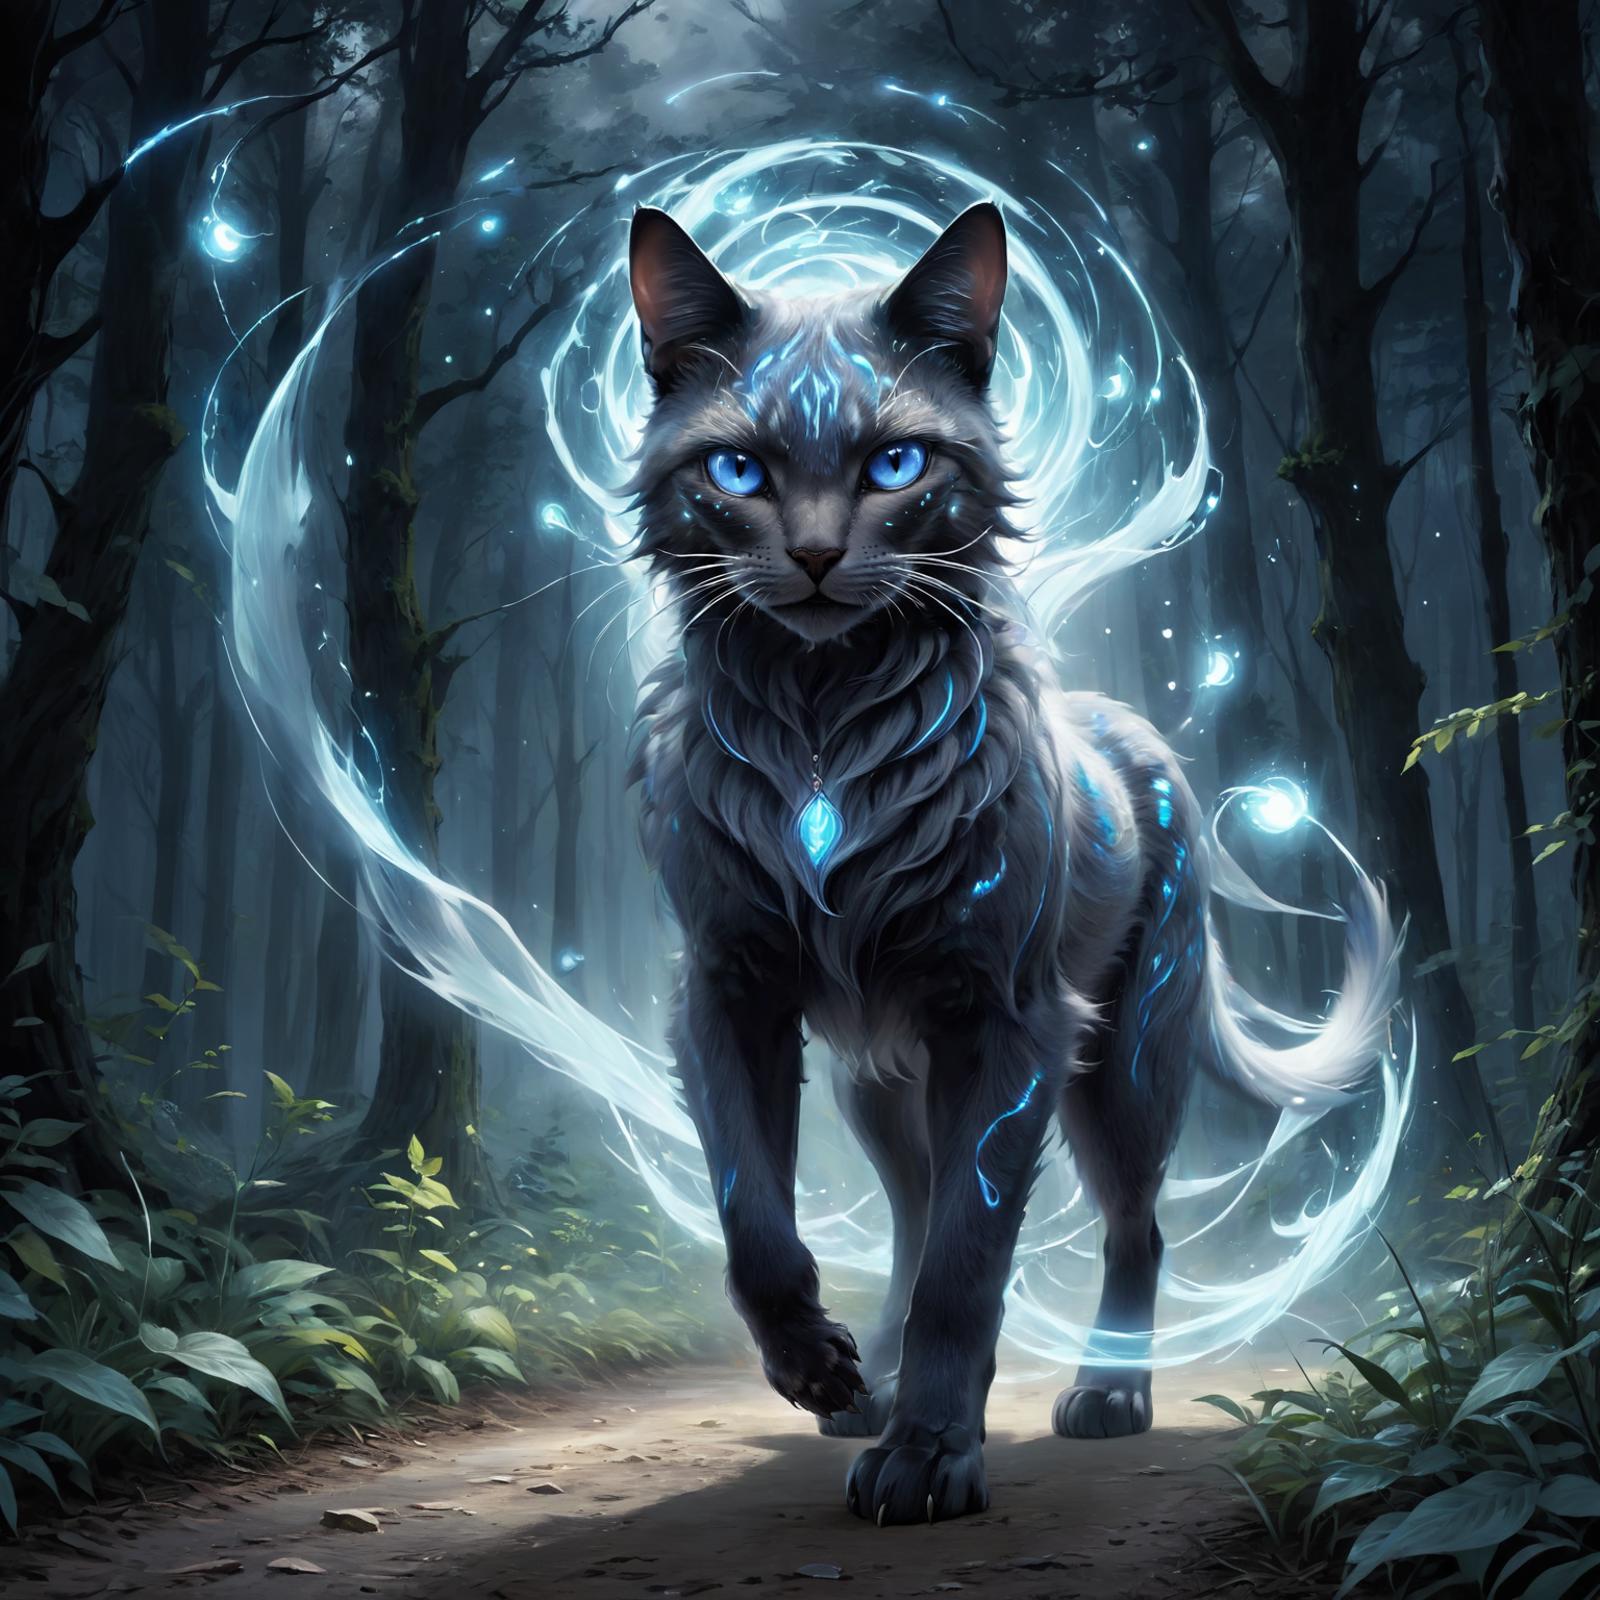 A blue-eyed cat with blue lightning streaks on its back, walking through a forest trail.